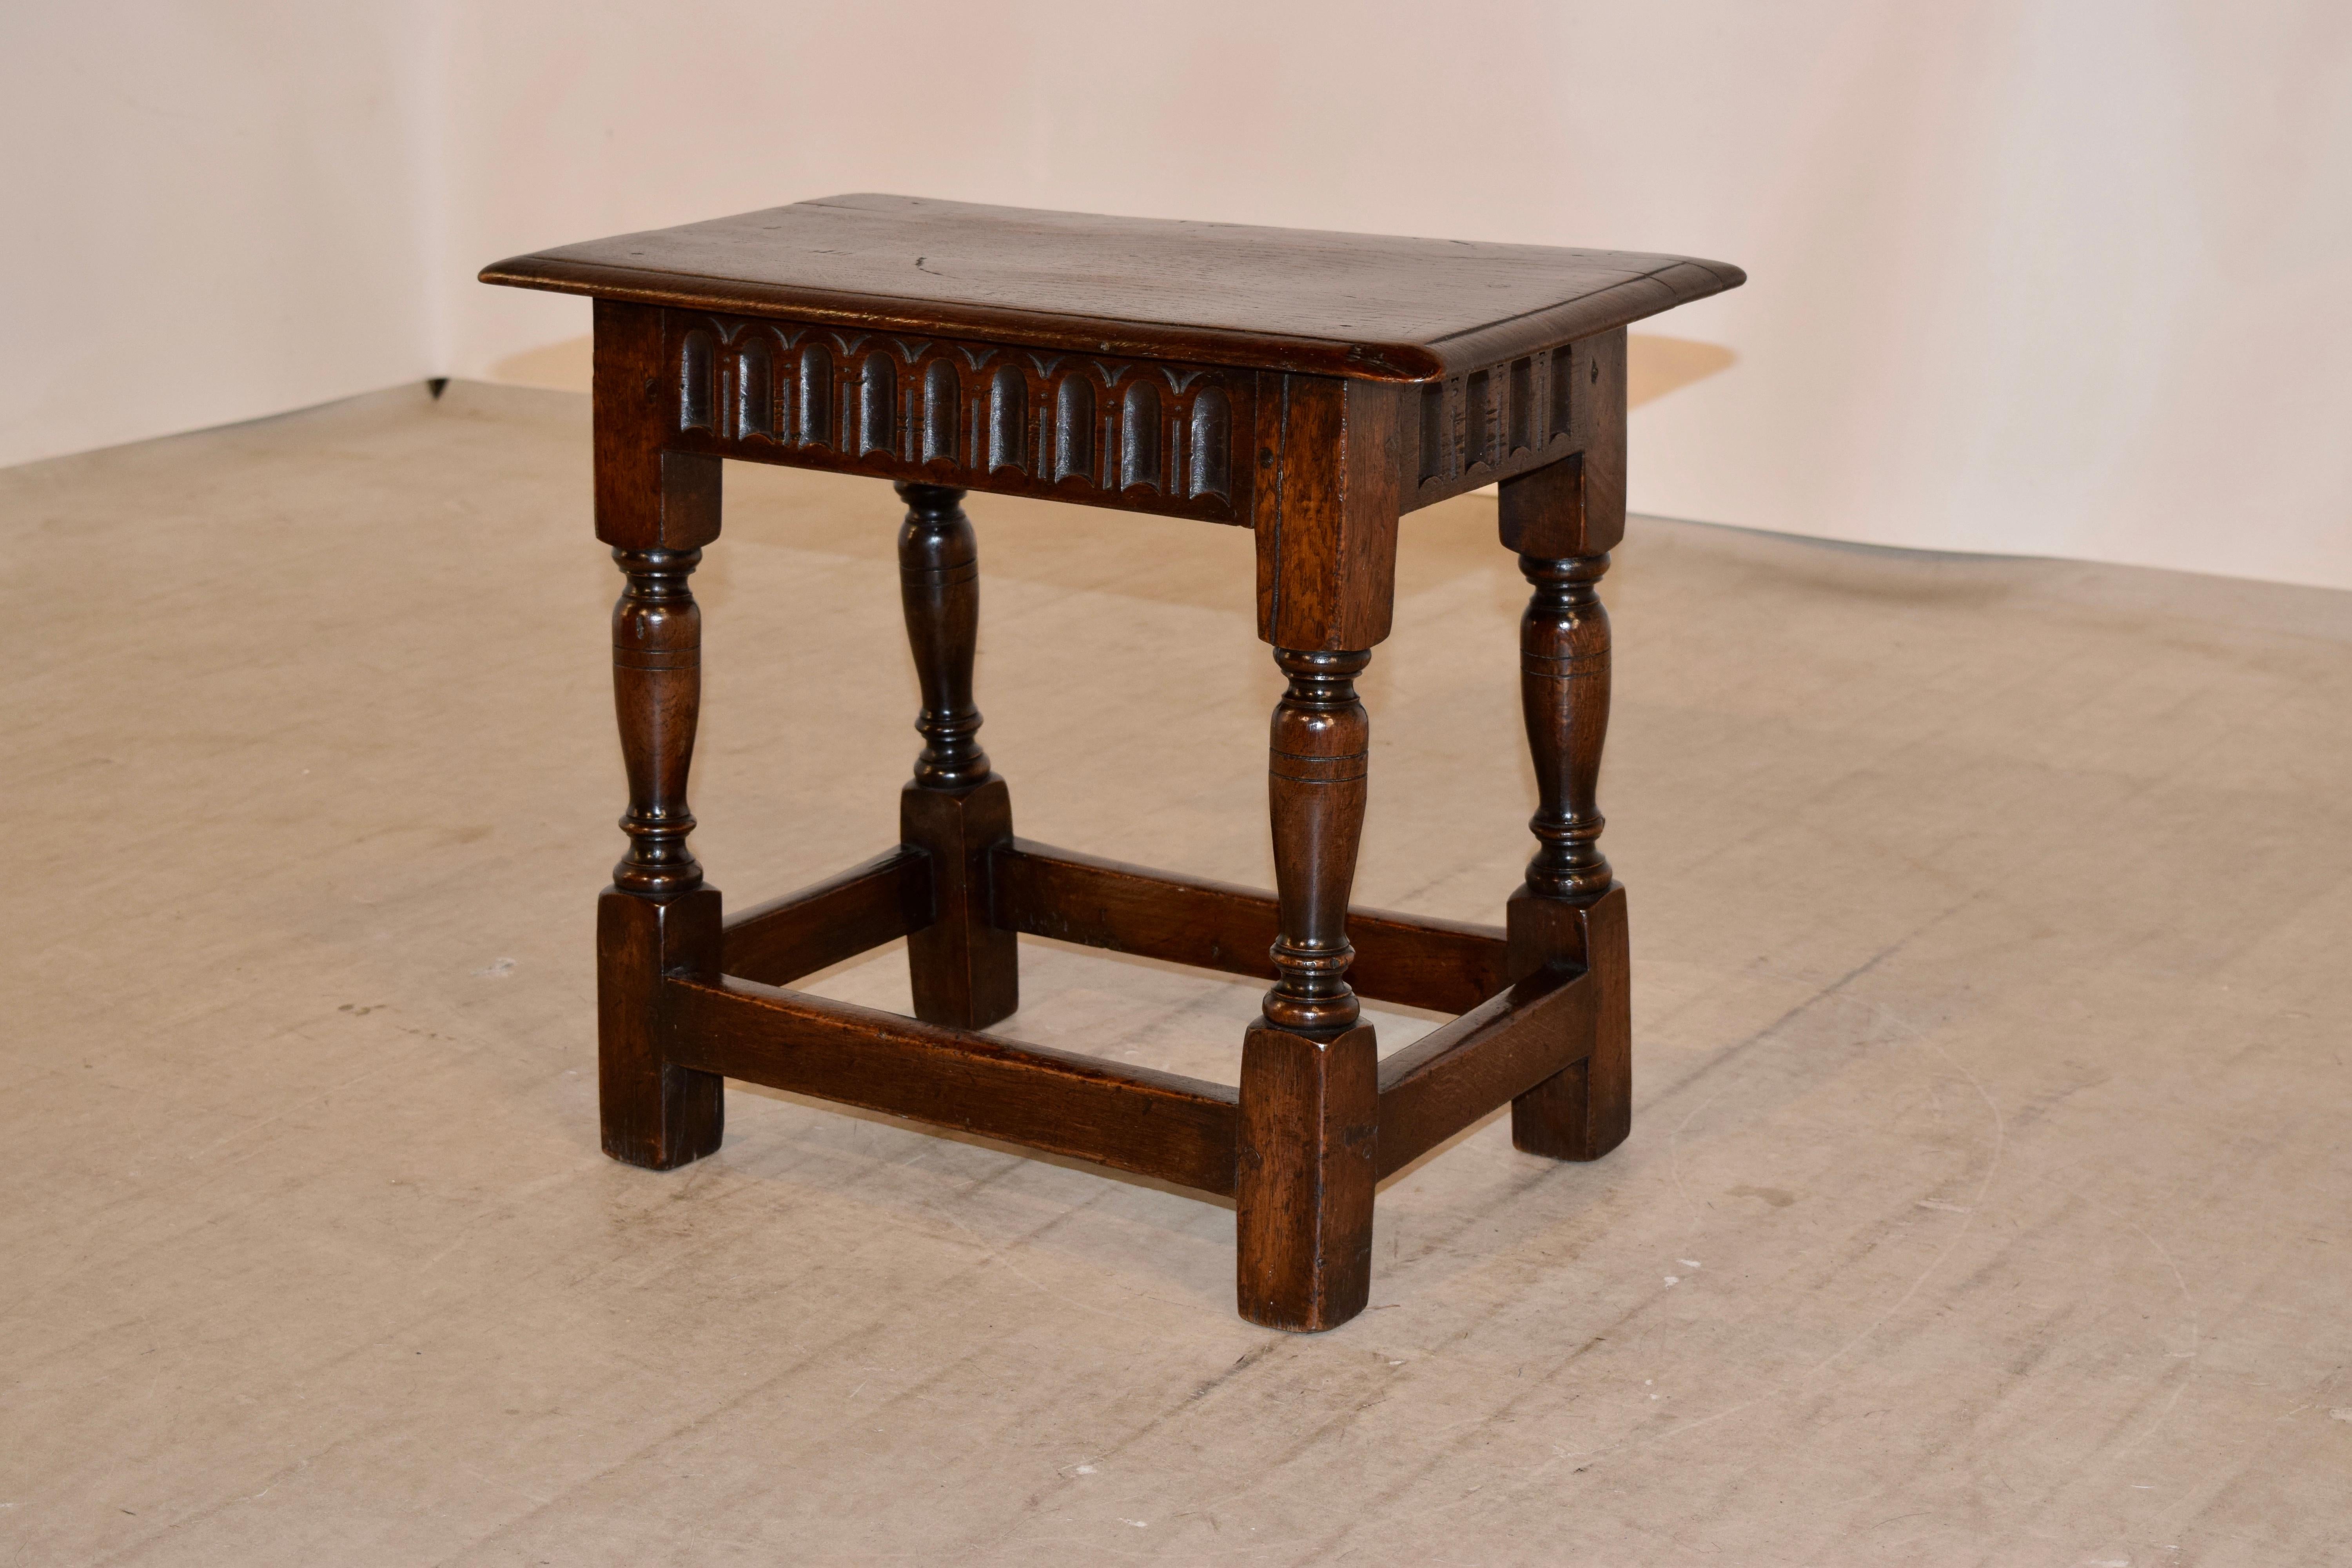 19th century English oak joint stool with a beveled edge around the top following down to a reeded apron and supported on hand-turned legs joined by simple stretchers.